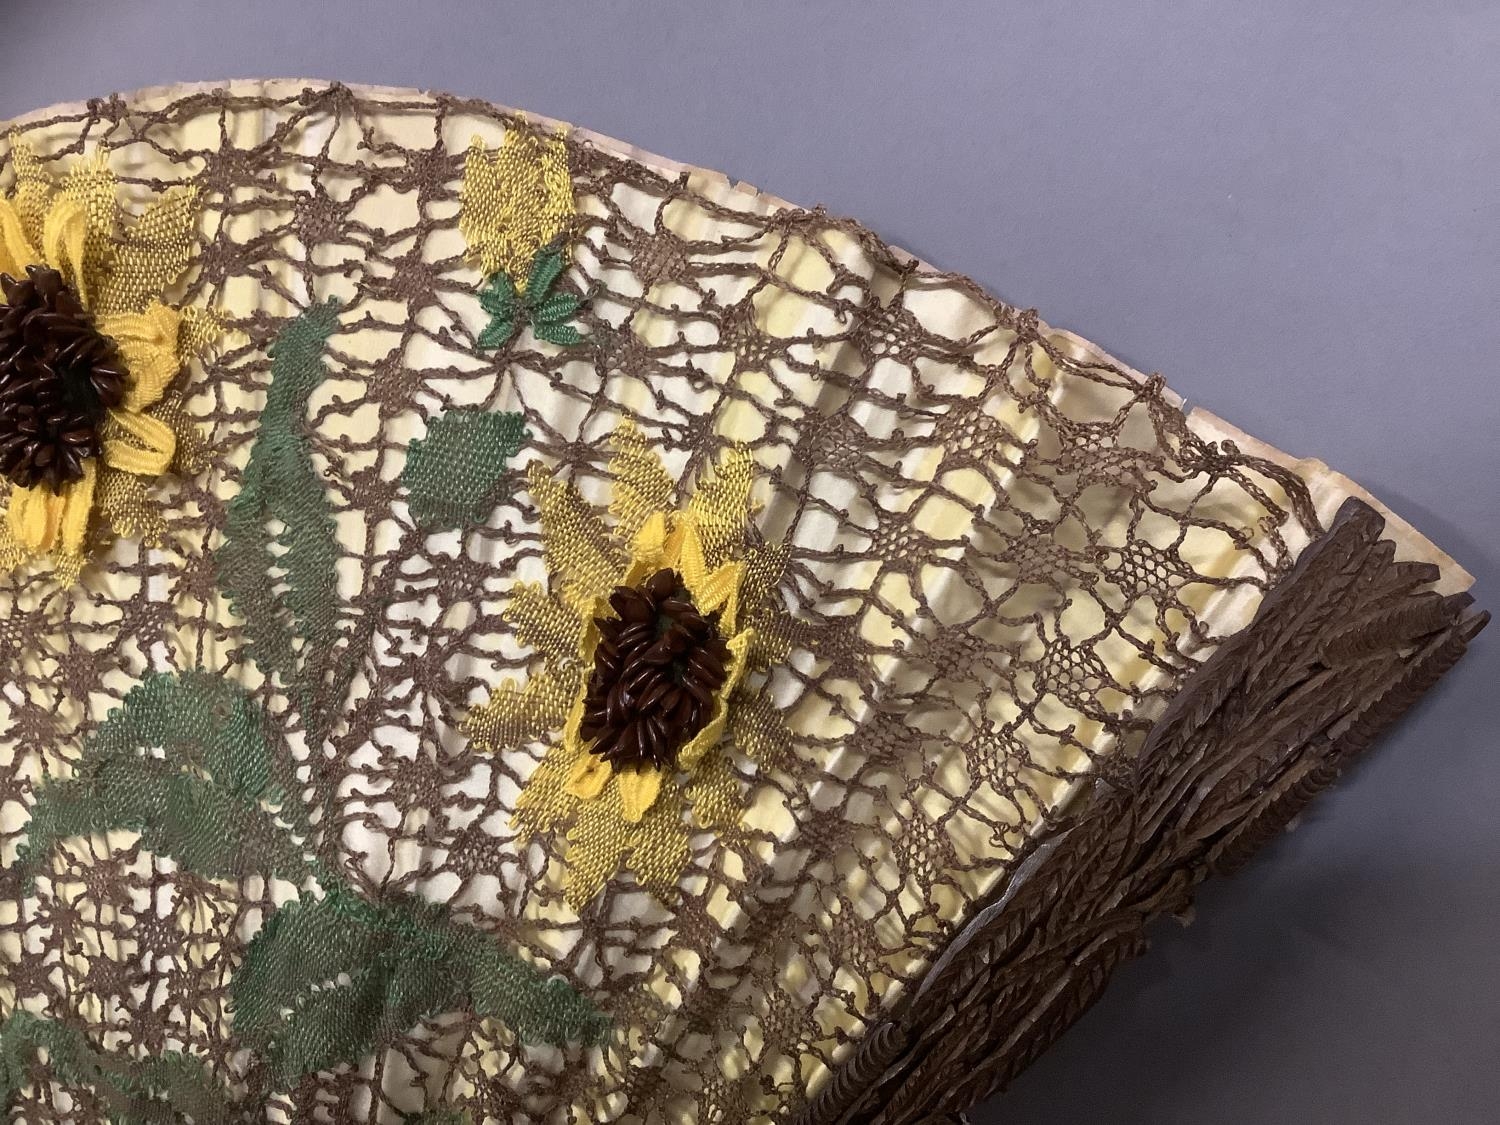 Ann Collier: Sunflowers, a large lace fan mounted on late 19th century carved and pierced wood - Image 3 of 4